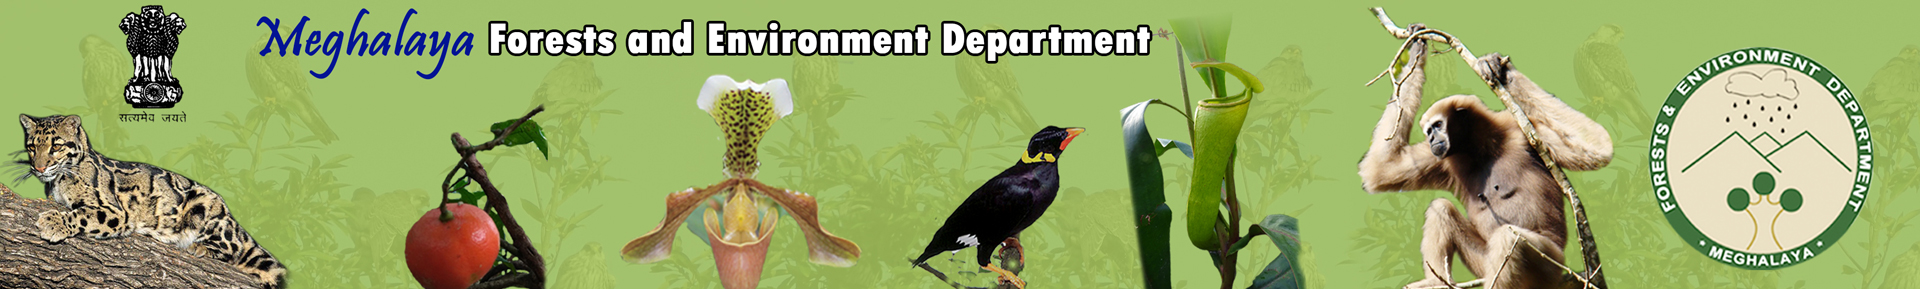 Forests & Environment Department Banner